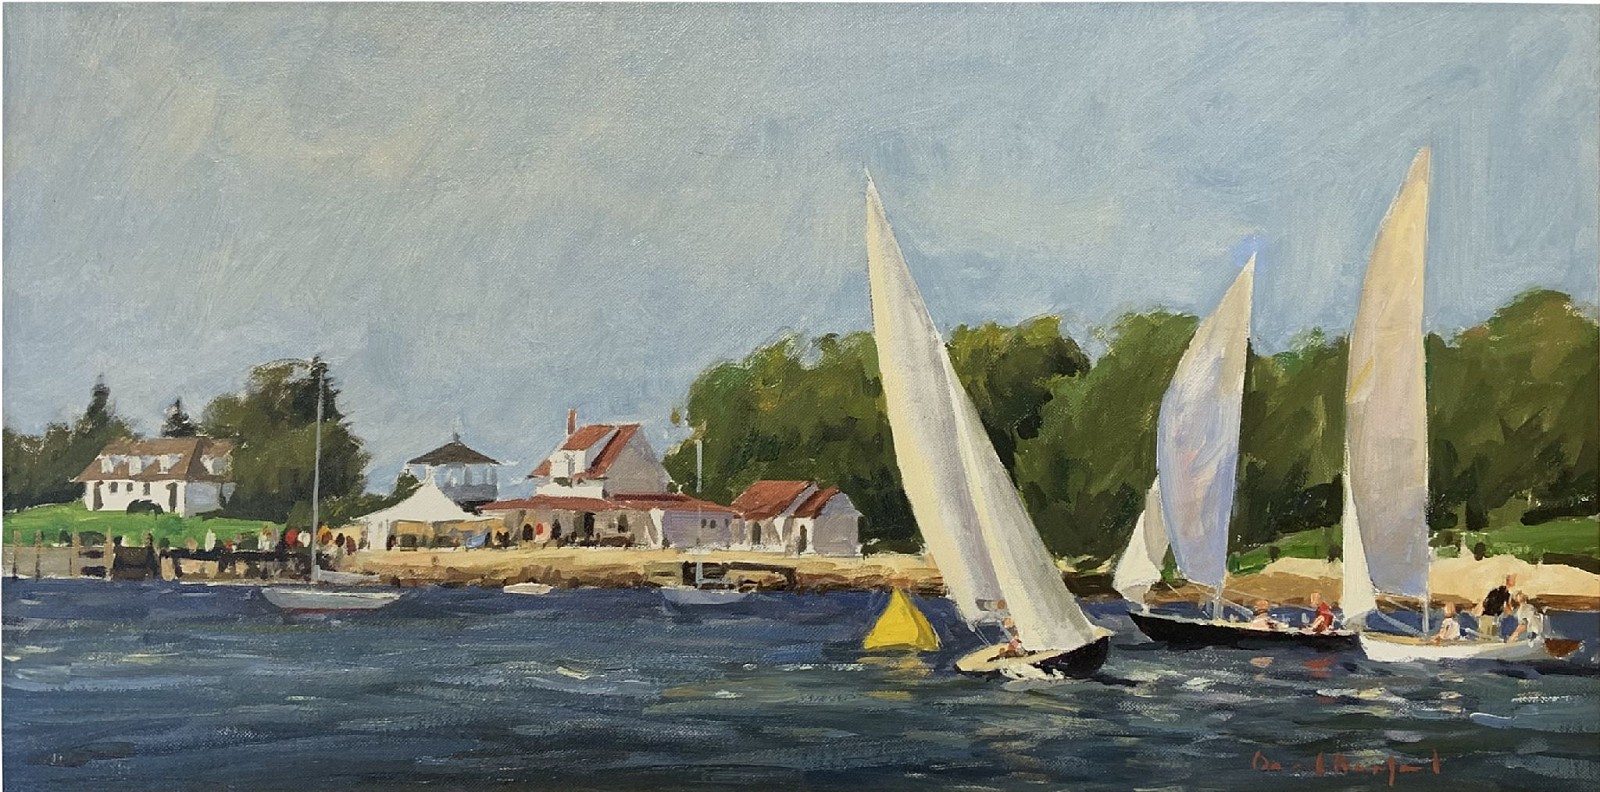 David Bareford, Blue Nose Class Racing, 2023
oil on panel, 12 x 24 in. (30.5 x 61 cm)
DB230603